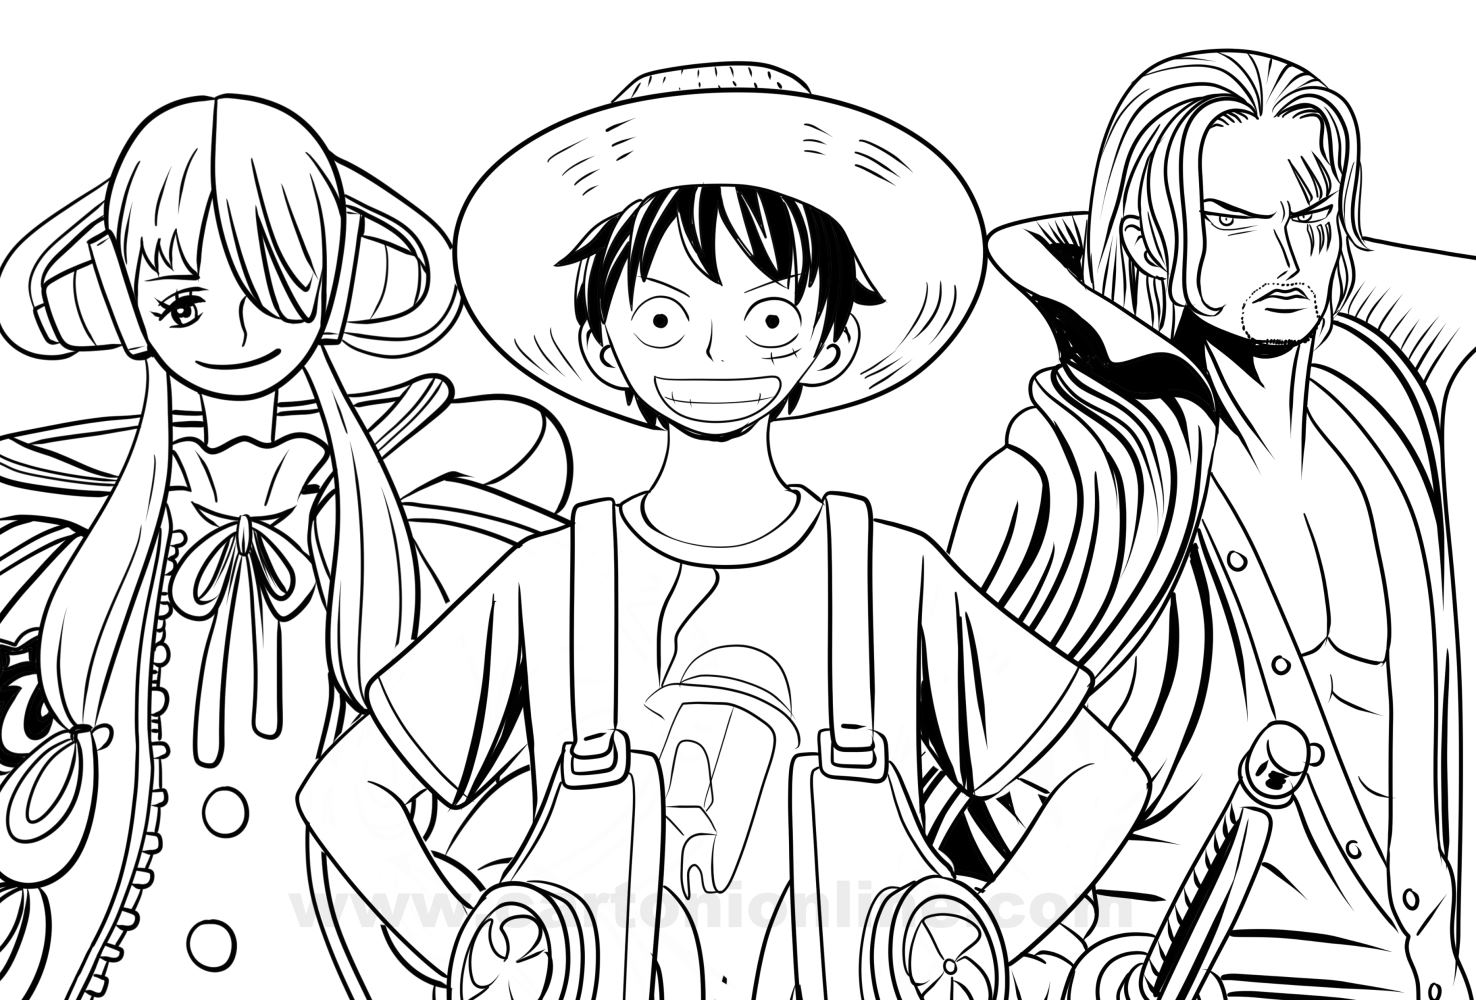 ONE PIECE FILM: RED から ONE PIECE FILM: RED を描く